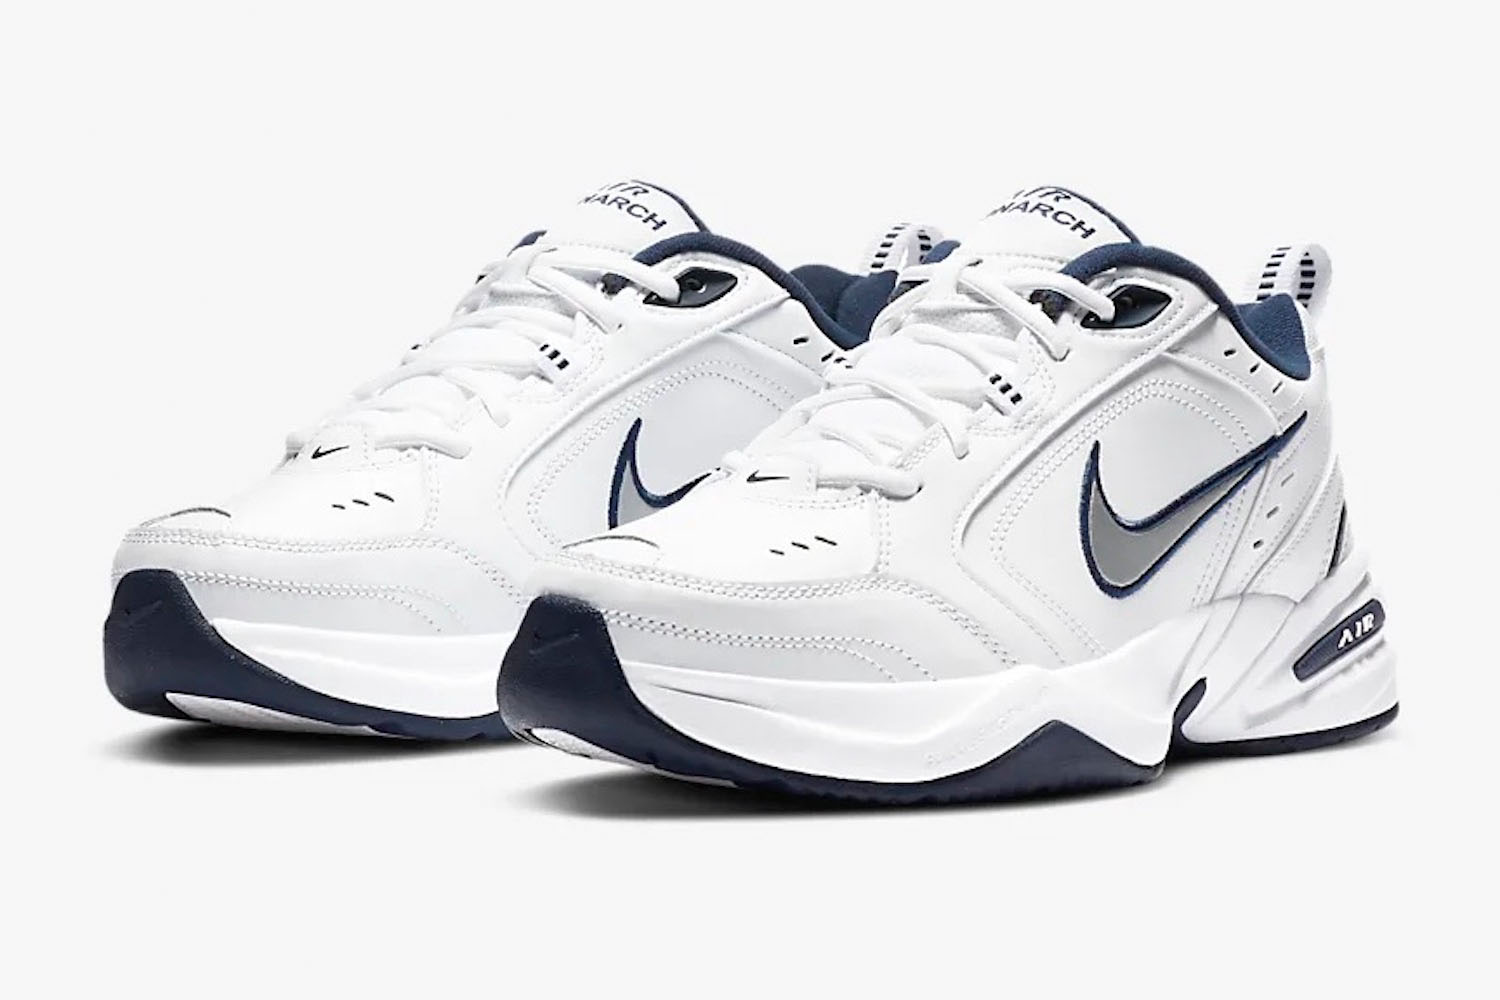 a pair of white and black accented Nike Air Monarch IV's on a white background